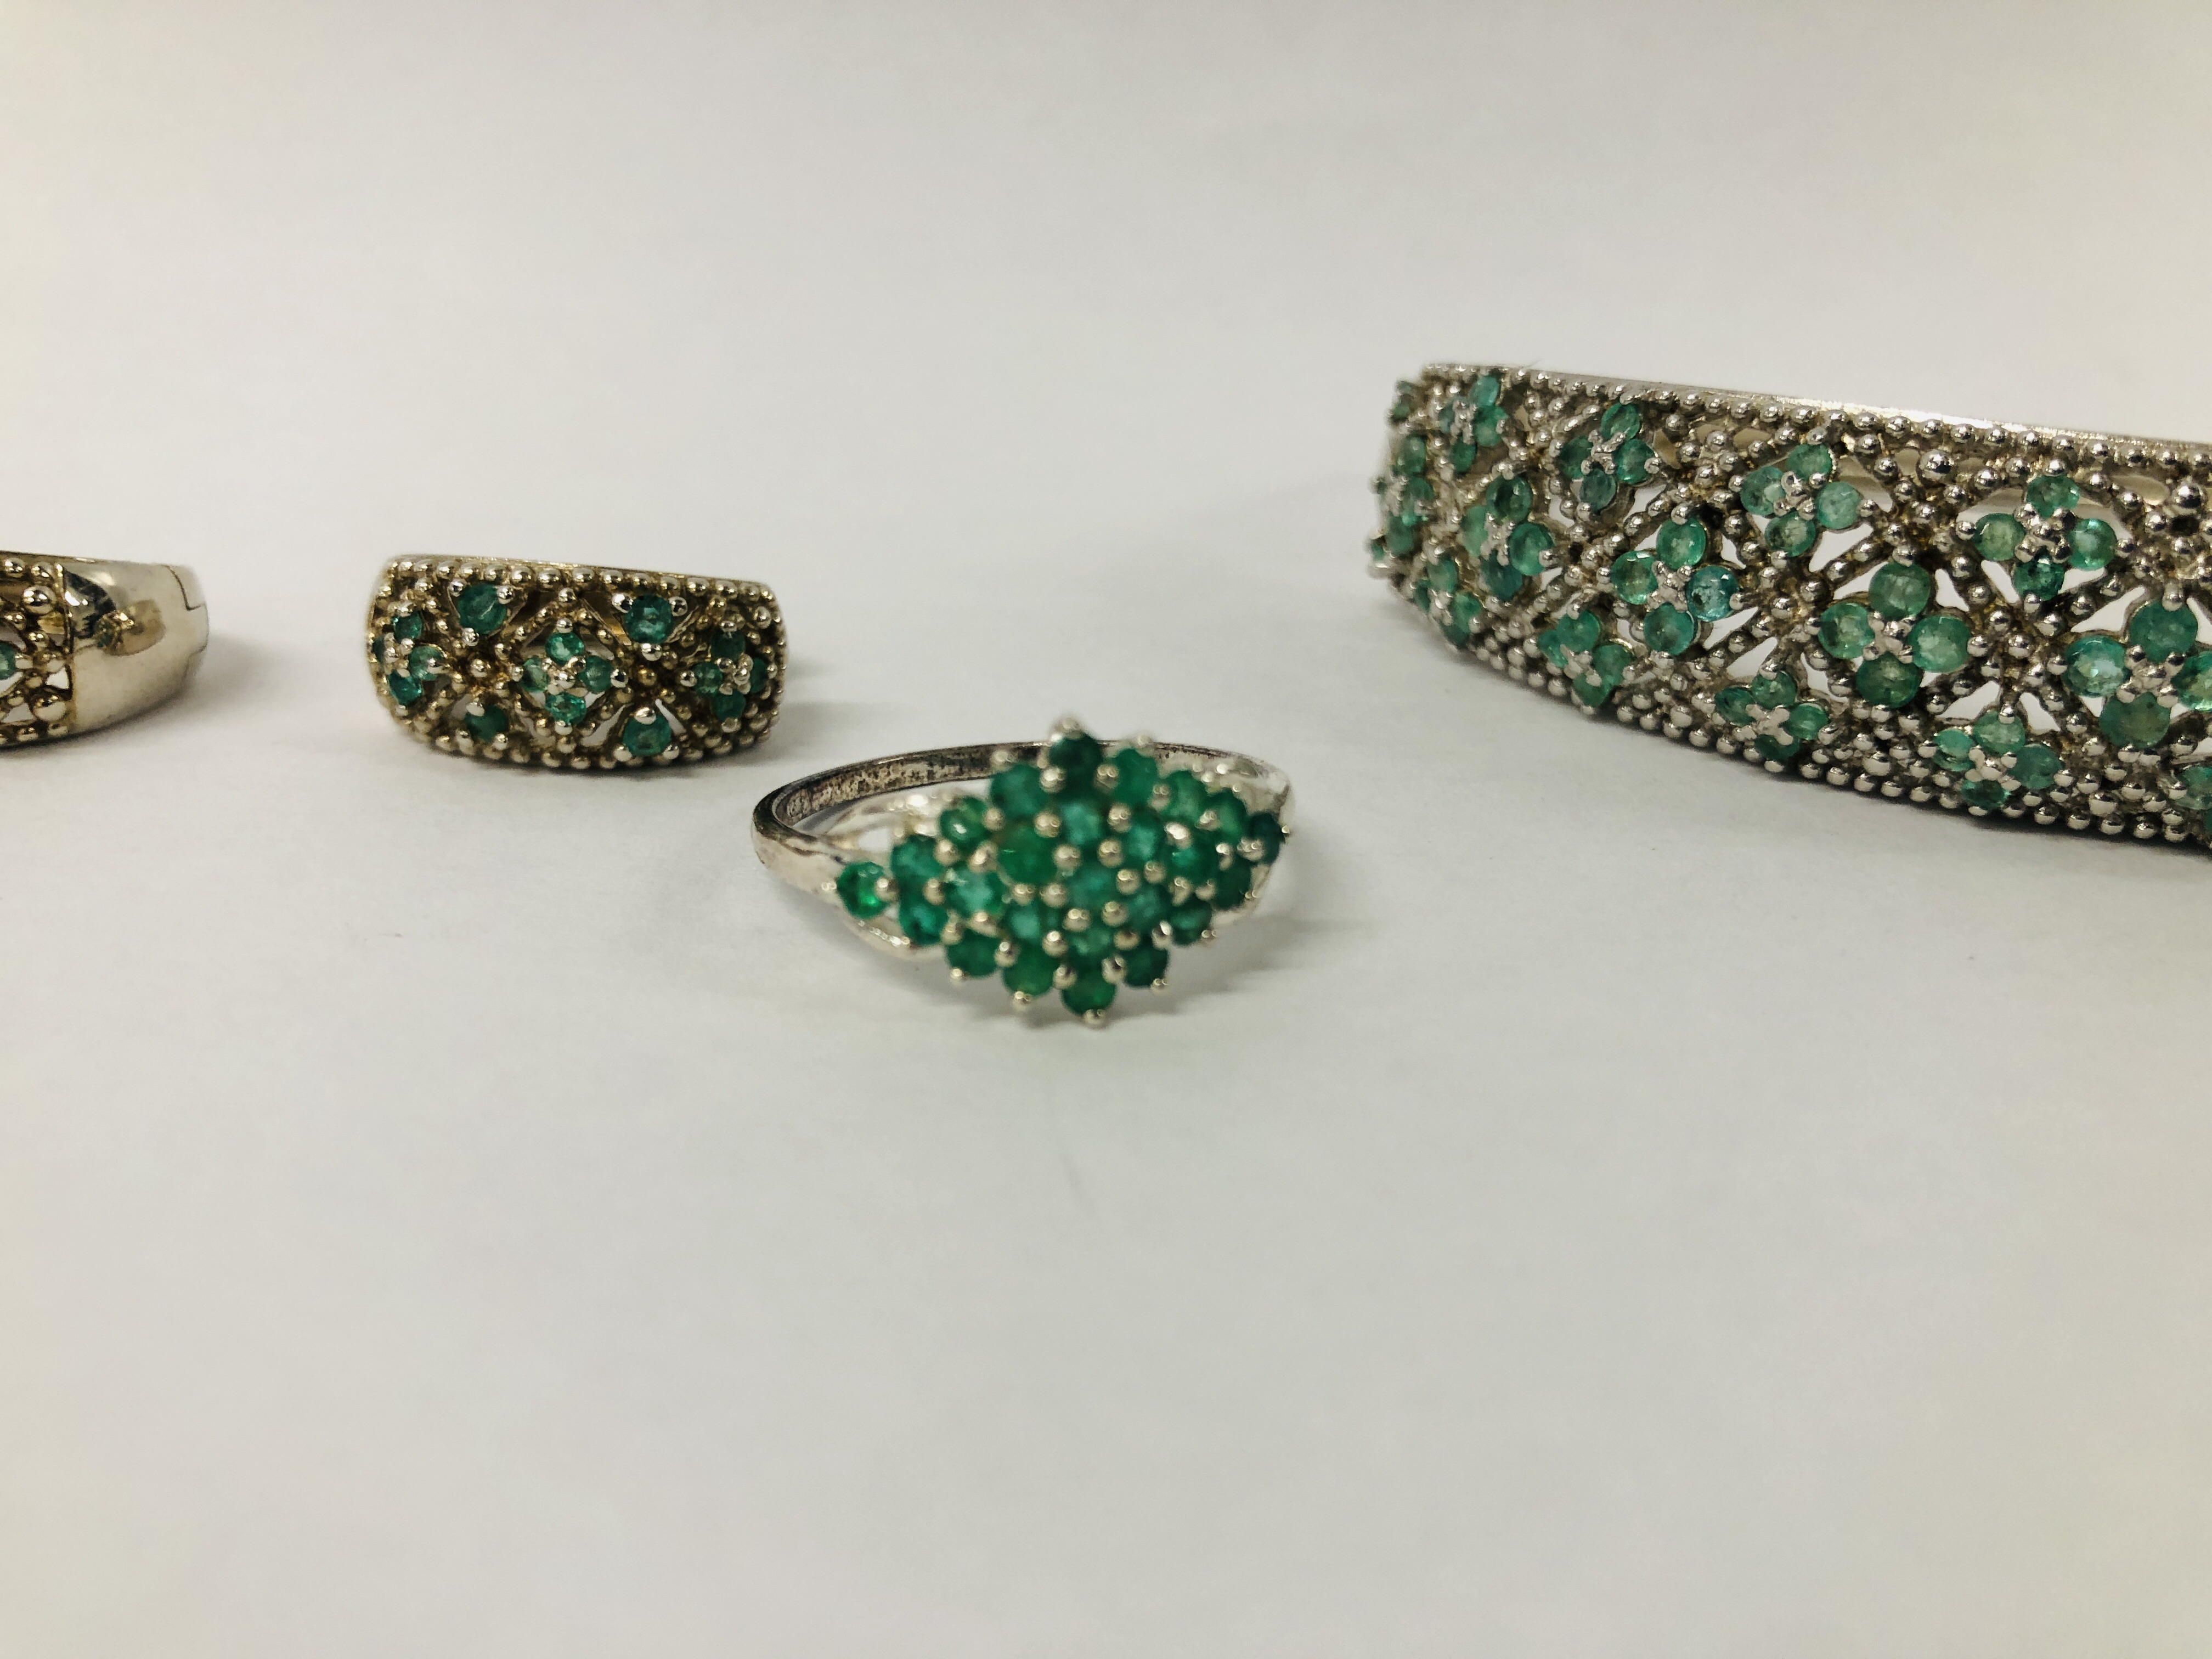 DESIGNER SILVER HINGED BANGLE SET WITH GREEN STONES IN A FLOWER HEAD DESIGN ALONG WITH A PAIR OF - Image 3 of 11